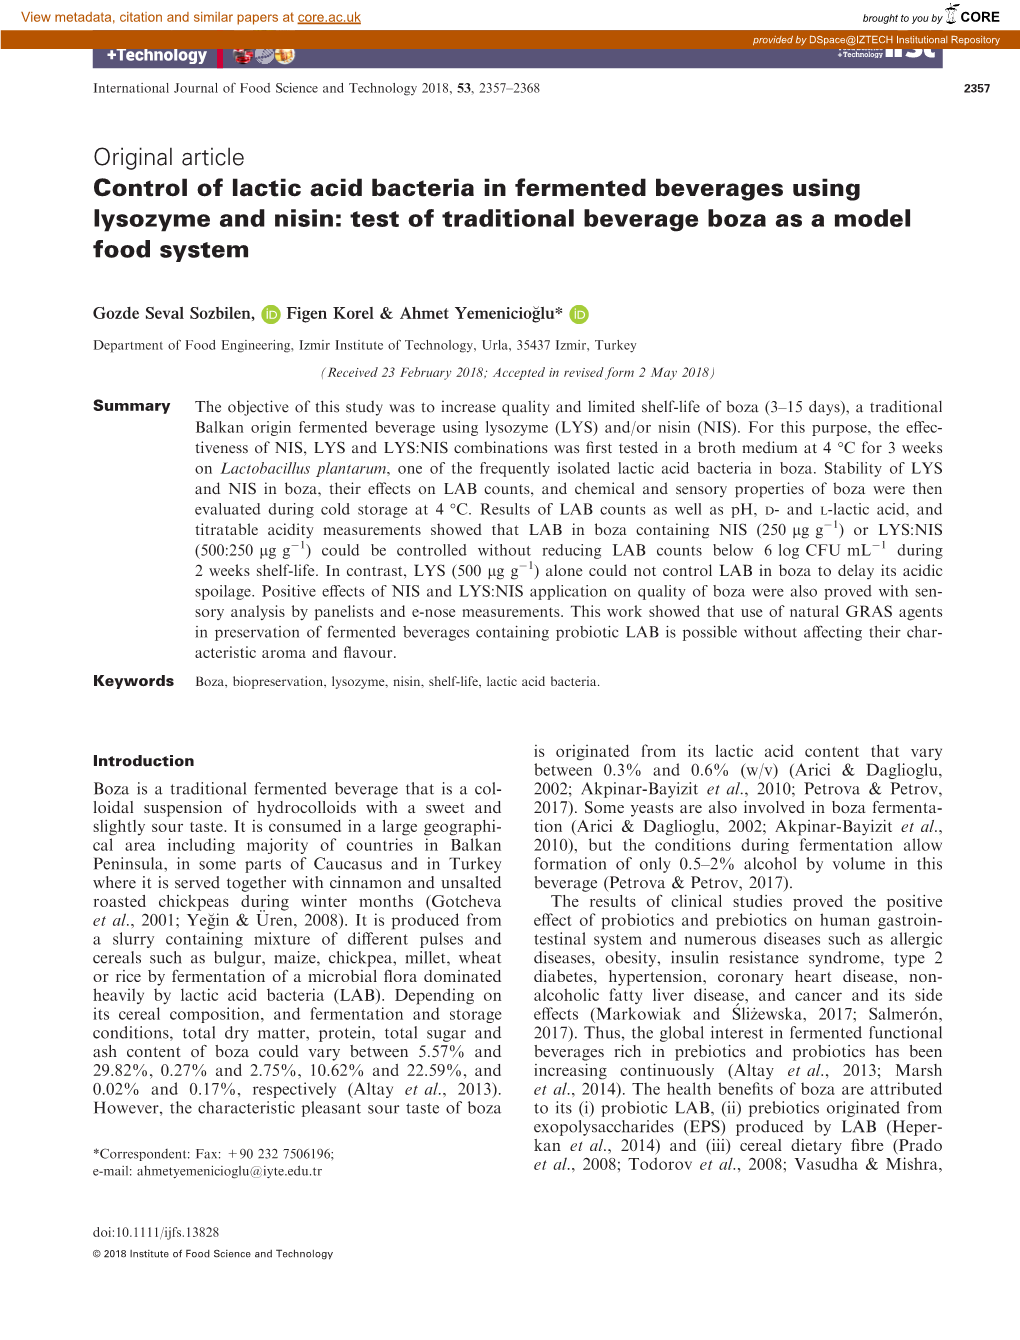 Control of Lactic Acid Bacteria in Fermented Beverages Using Lysozyme and Nisin: Test of Traditional Beverage Boza As a Model Food System